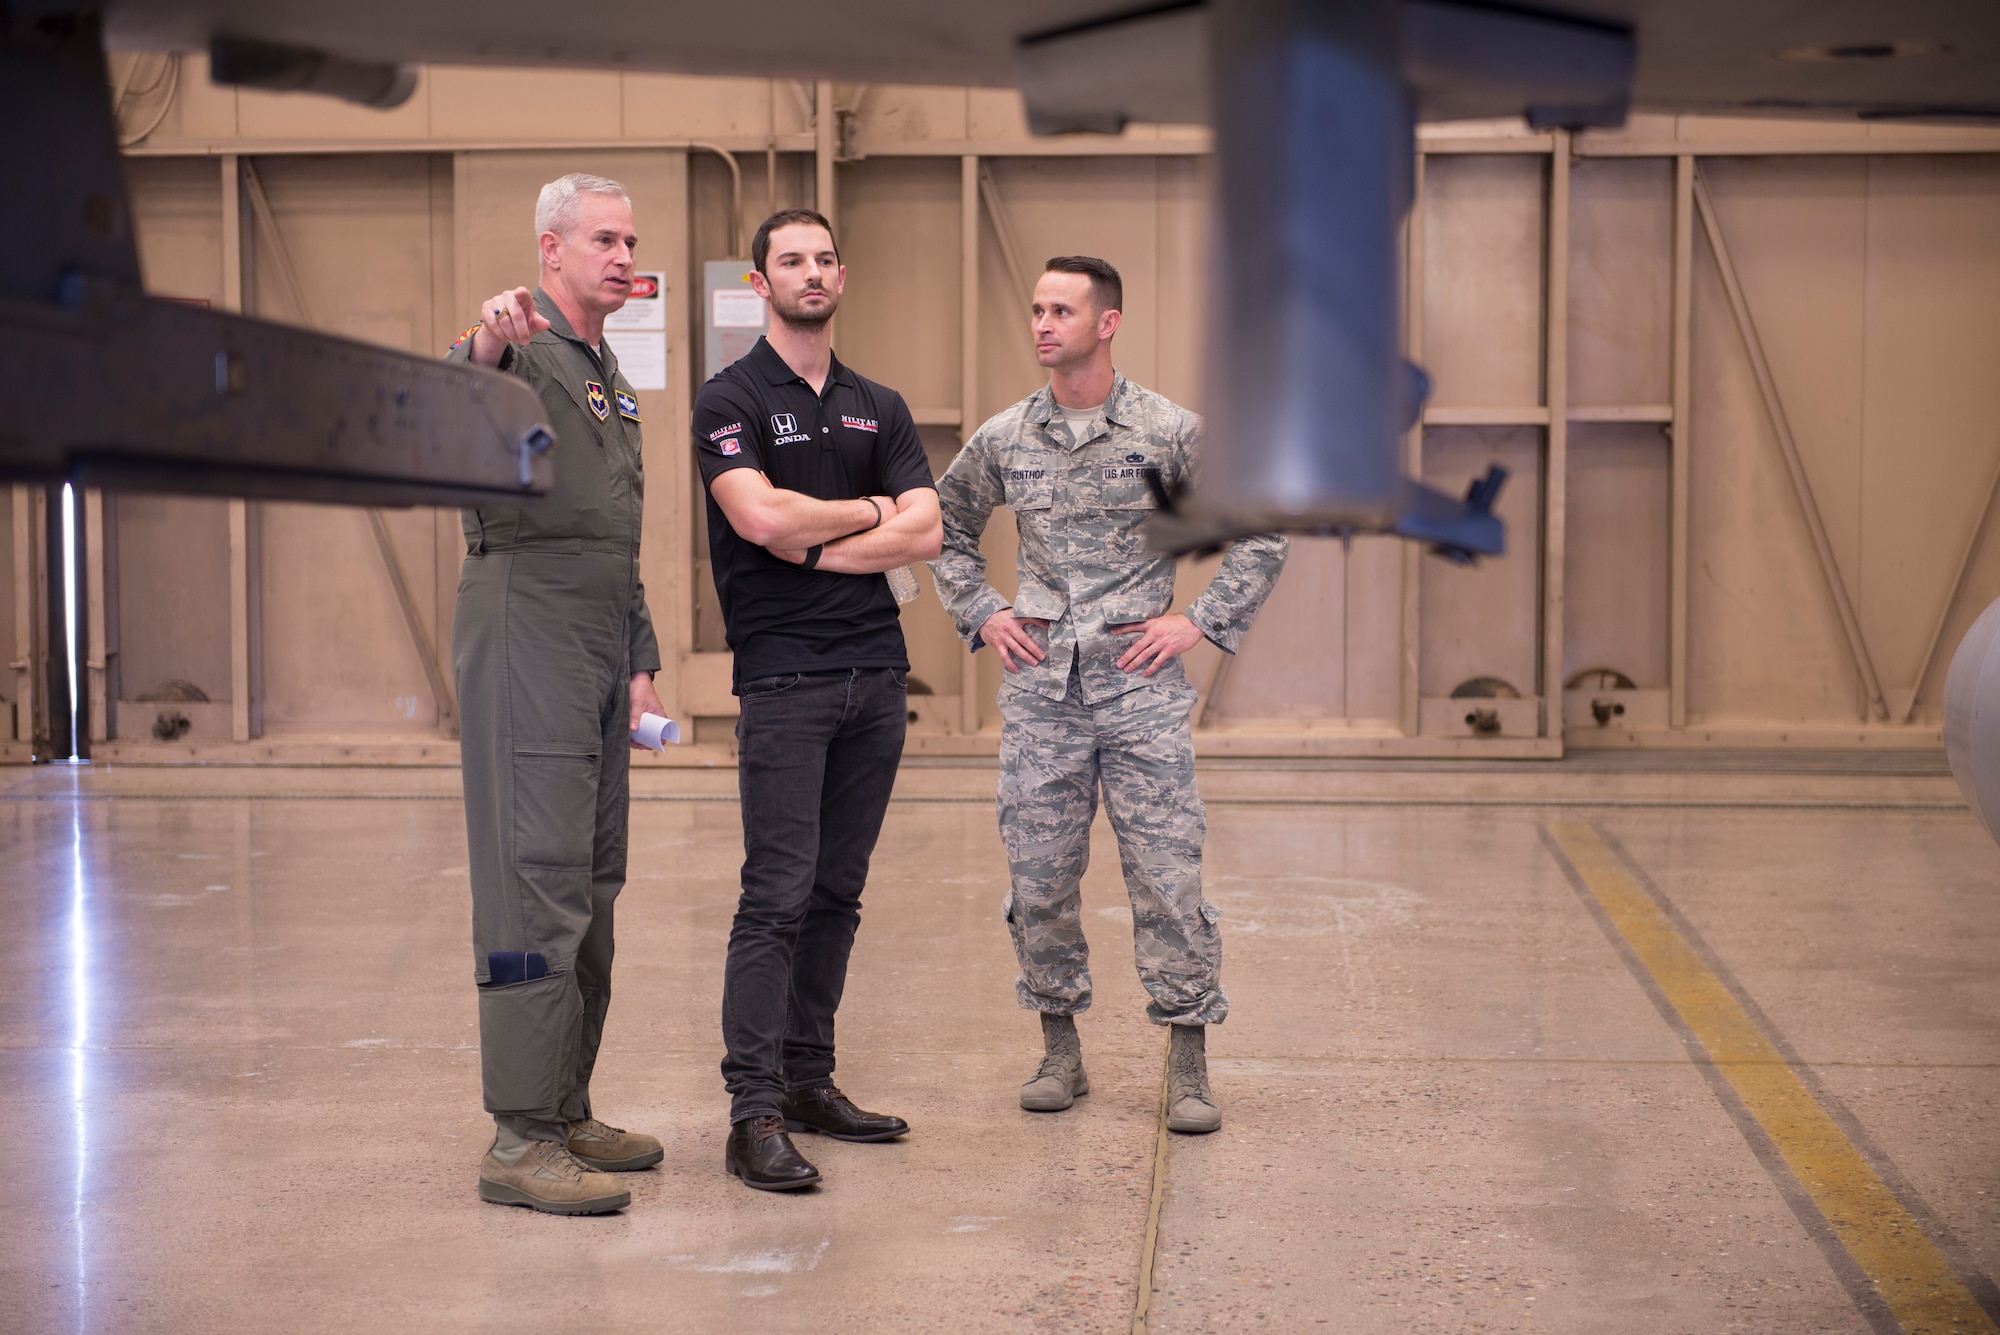 Col. Michael Richardson, 56th Fighter Wing vice commander; Alexander Rossi, Andretti Autosport racecar driver; and Master Sgt. Justin Kruithof, 56th Equipment Maintenance Squadron fabrication flight superintendent, talk about the F-16 Fighting Falcon and its capabilities at Luke Air Force Base, Ariz., April 5, 2018. Rossi, an Indycar racer, greeted Airmen at a variety of locations as he toured the base. (U.S. Air Force photo by Senior Airman Ridge Shan)